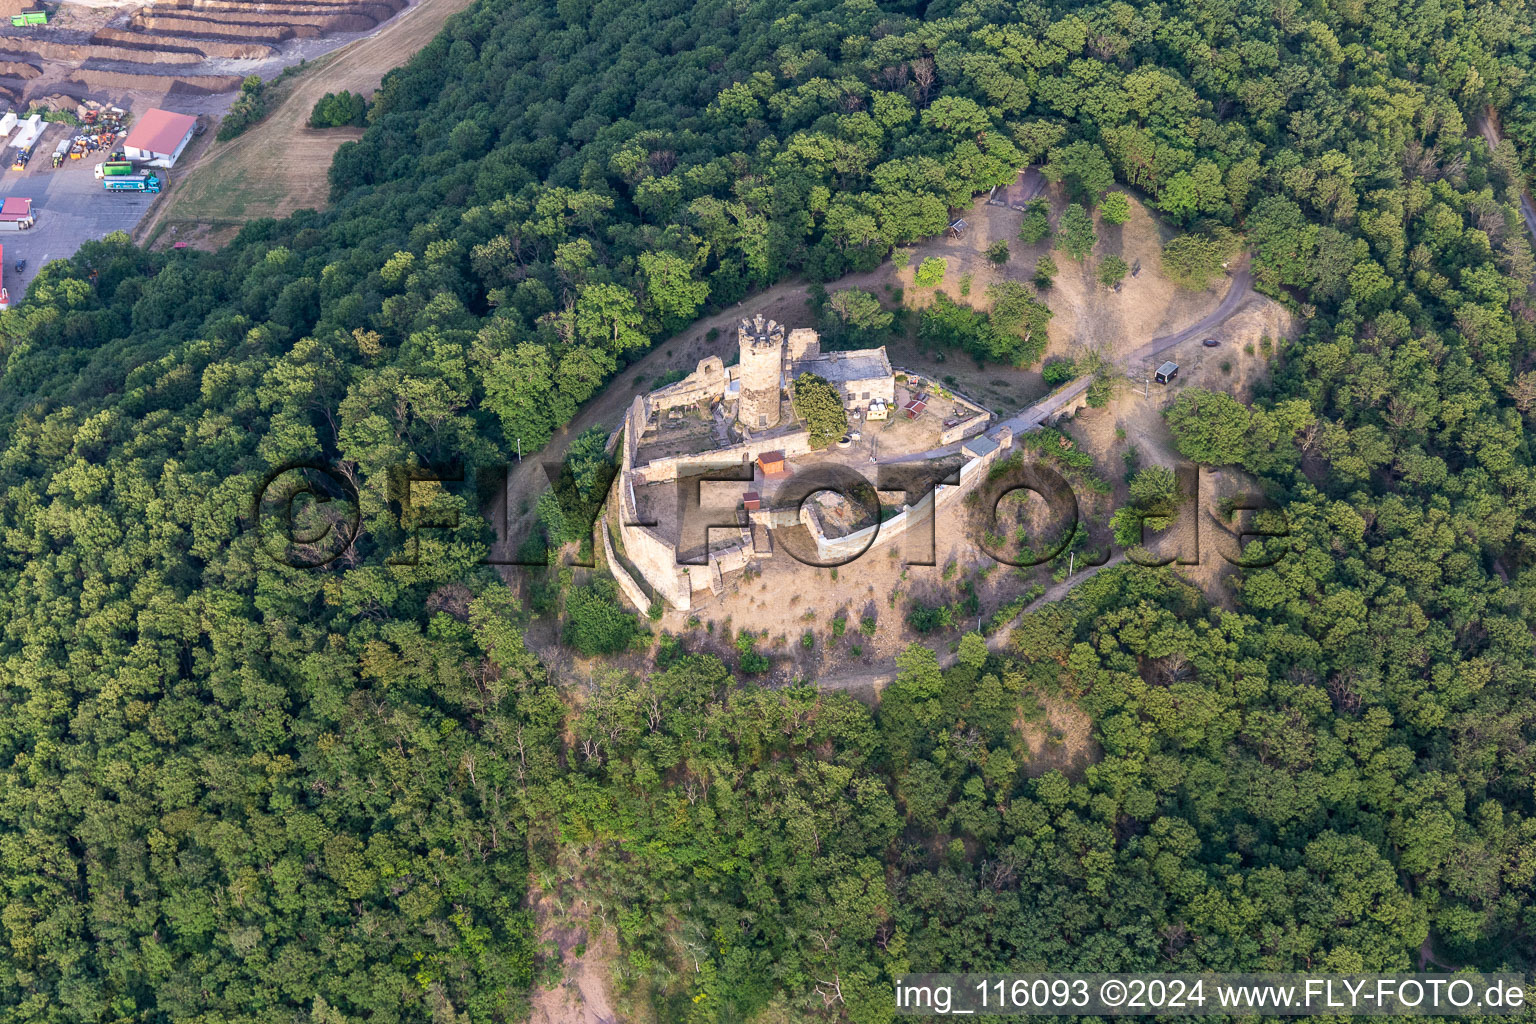 Aerial photograpy of Ruins and vestiges of the former castle and fortress Muehlburg in the district Muehlberg in Drei Gleichen in the state Thuringia, Germany